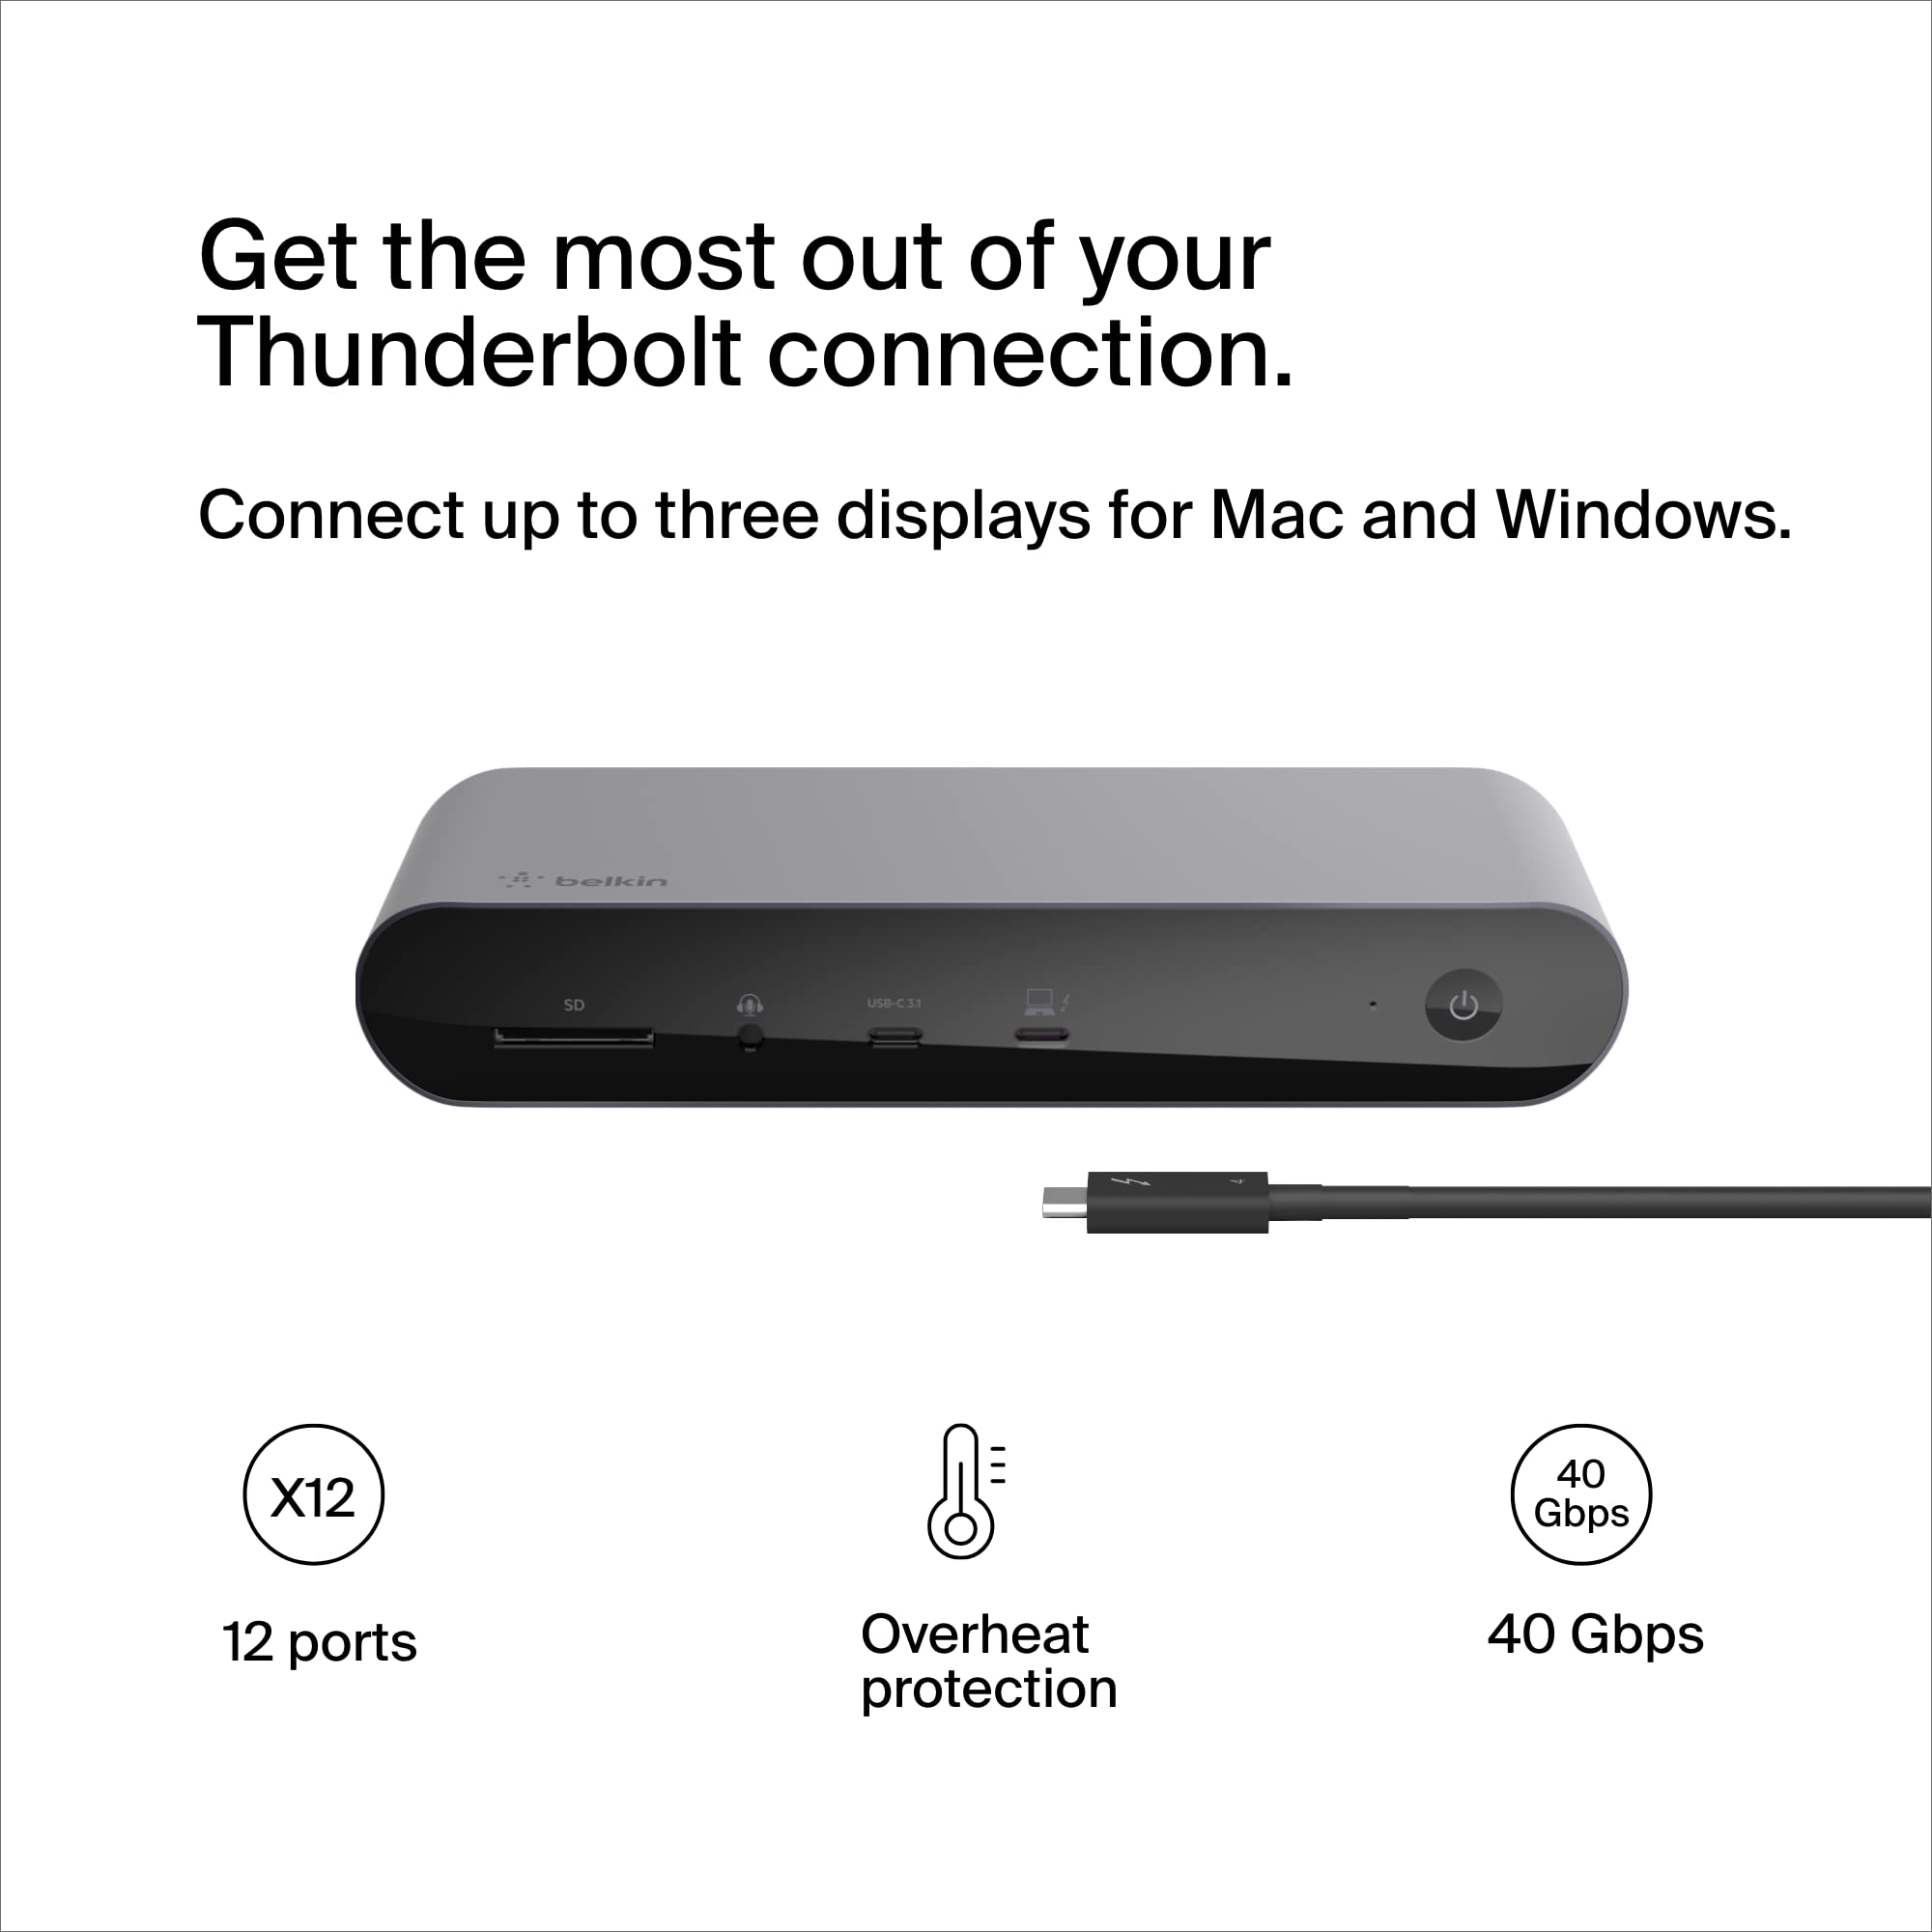 Belkin Thunderbolt 4 Docking Station, USB-C Hub Docking Station for MacBook & Window w/ 90W Power Delivery, Single 8K or Dual 4K Display, Thunderbolt 4 Cable Included, HDMI, Ethernet, SD & Audio Ports